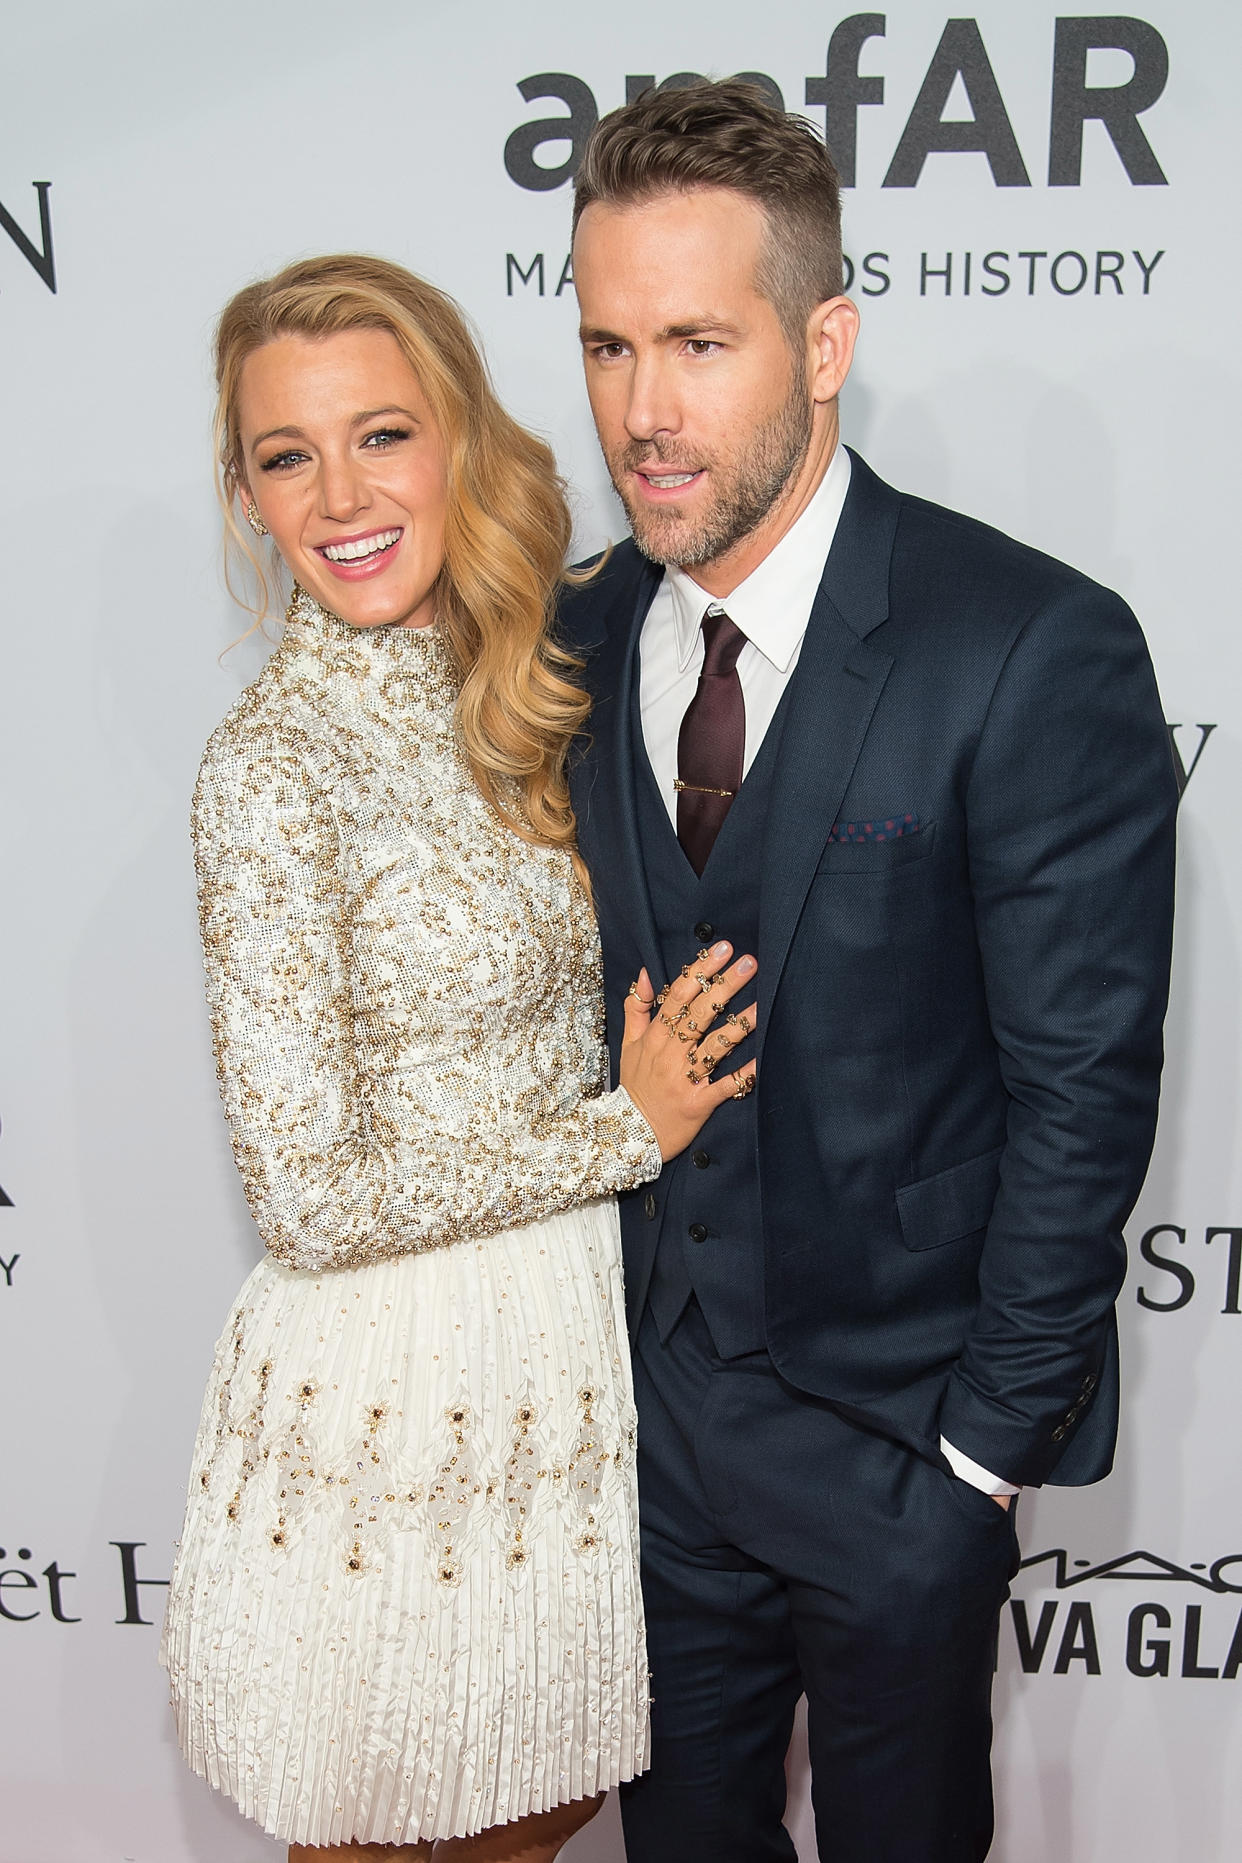 Blake Lively and Ryan Reynolds posing together